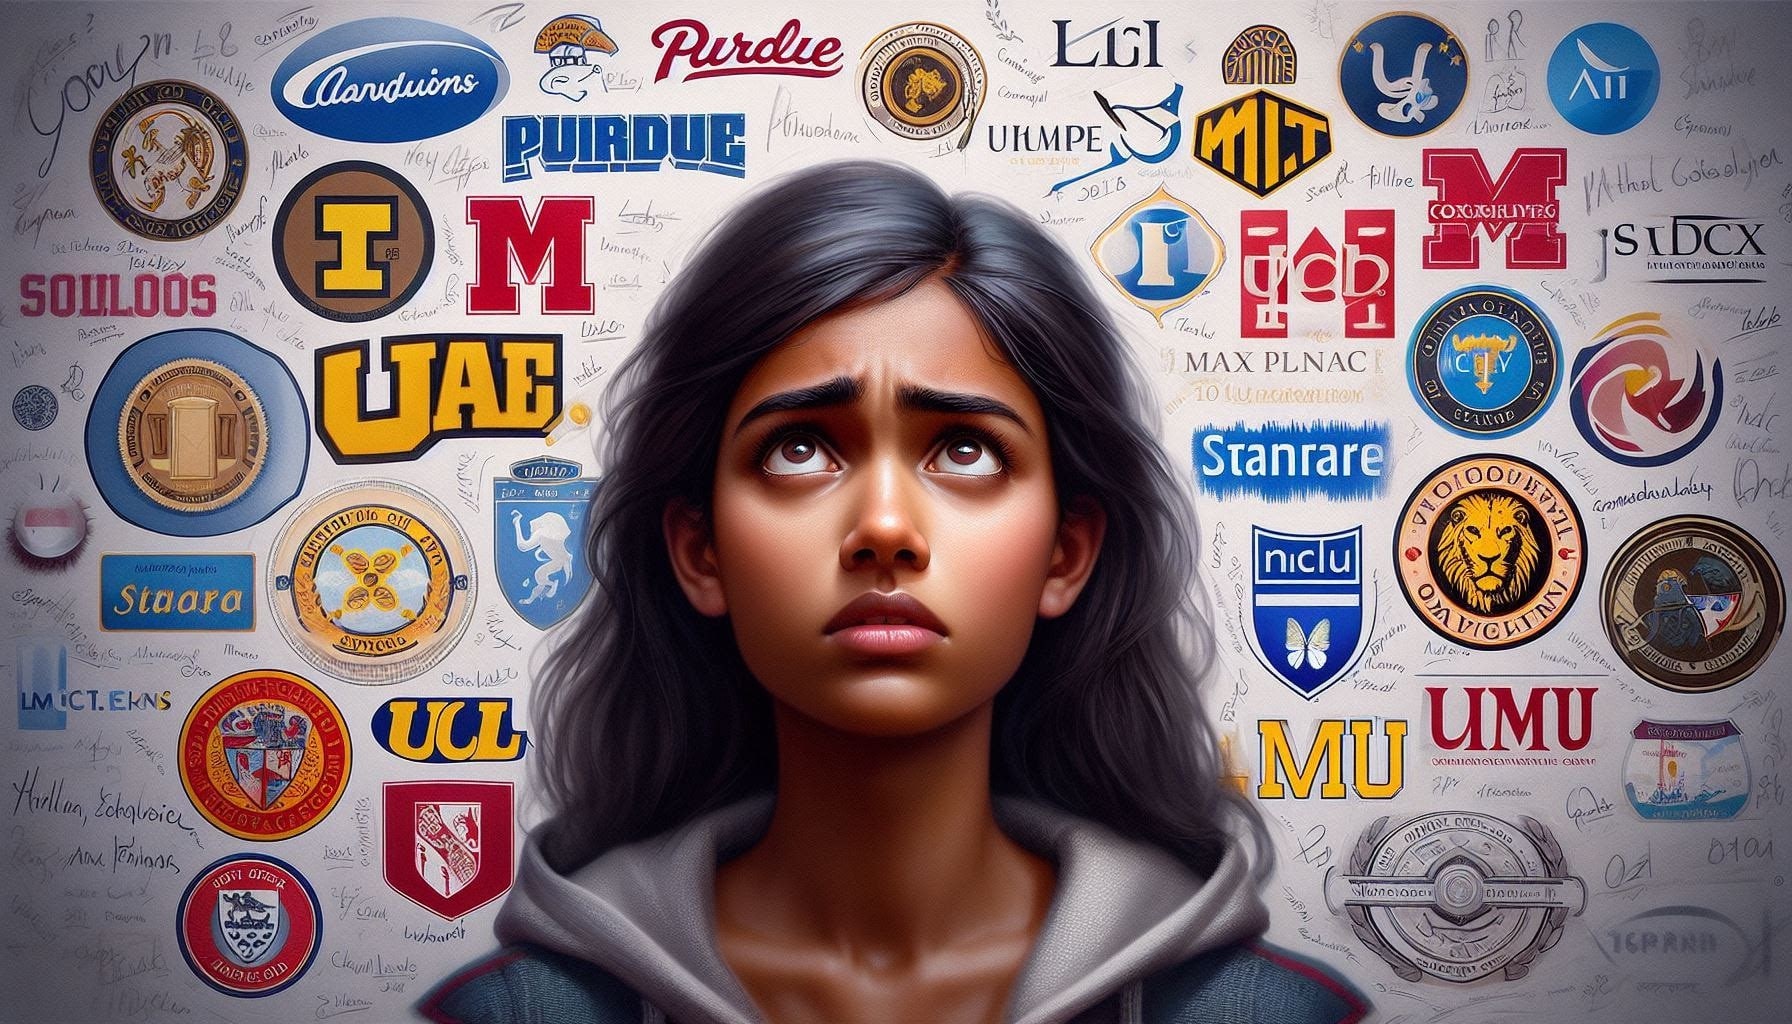 How to Choose PhD Program Right for You. an image with a girl of Indian origin in the center, surrounded by the logos of Purdue, MIT, UCLA, Stanford, Cambridge, Oxford, UCL, LMU, Max Planck, and others. She has an expression of confusion and deep thought, just as you requested.